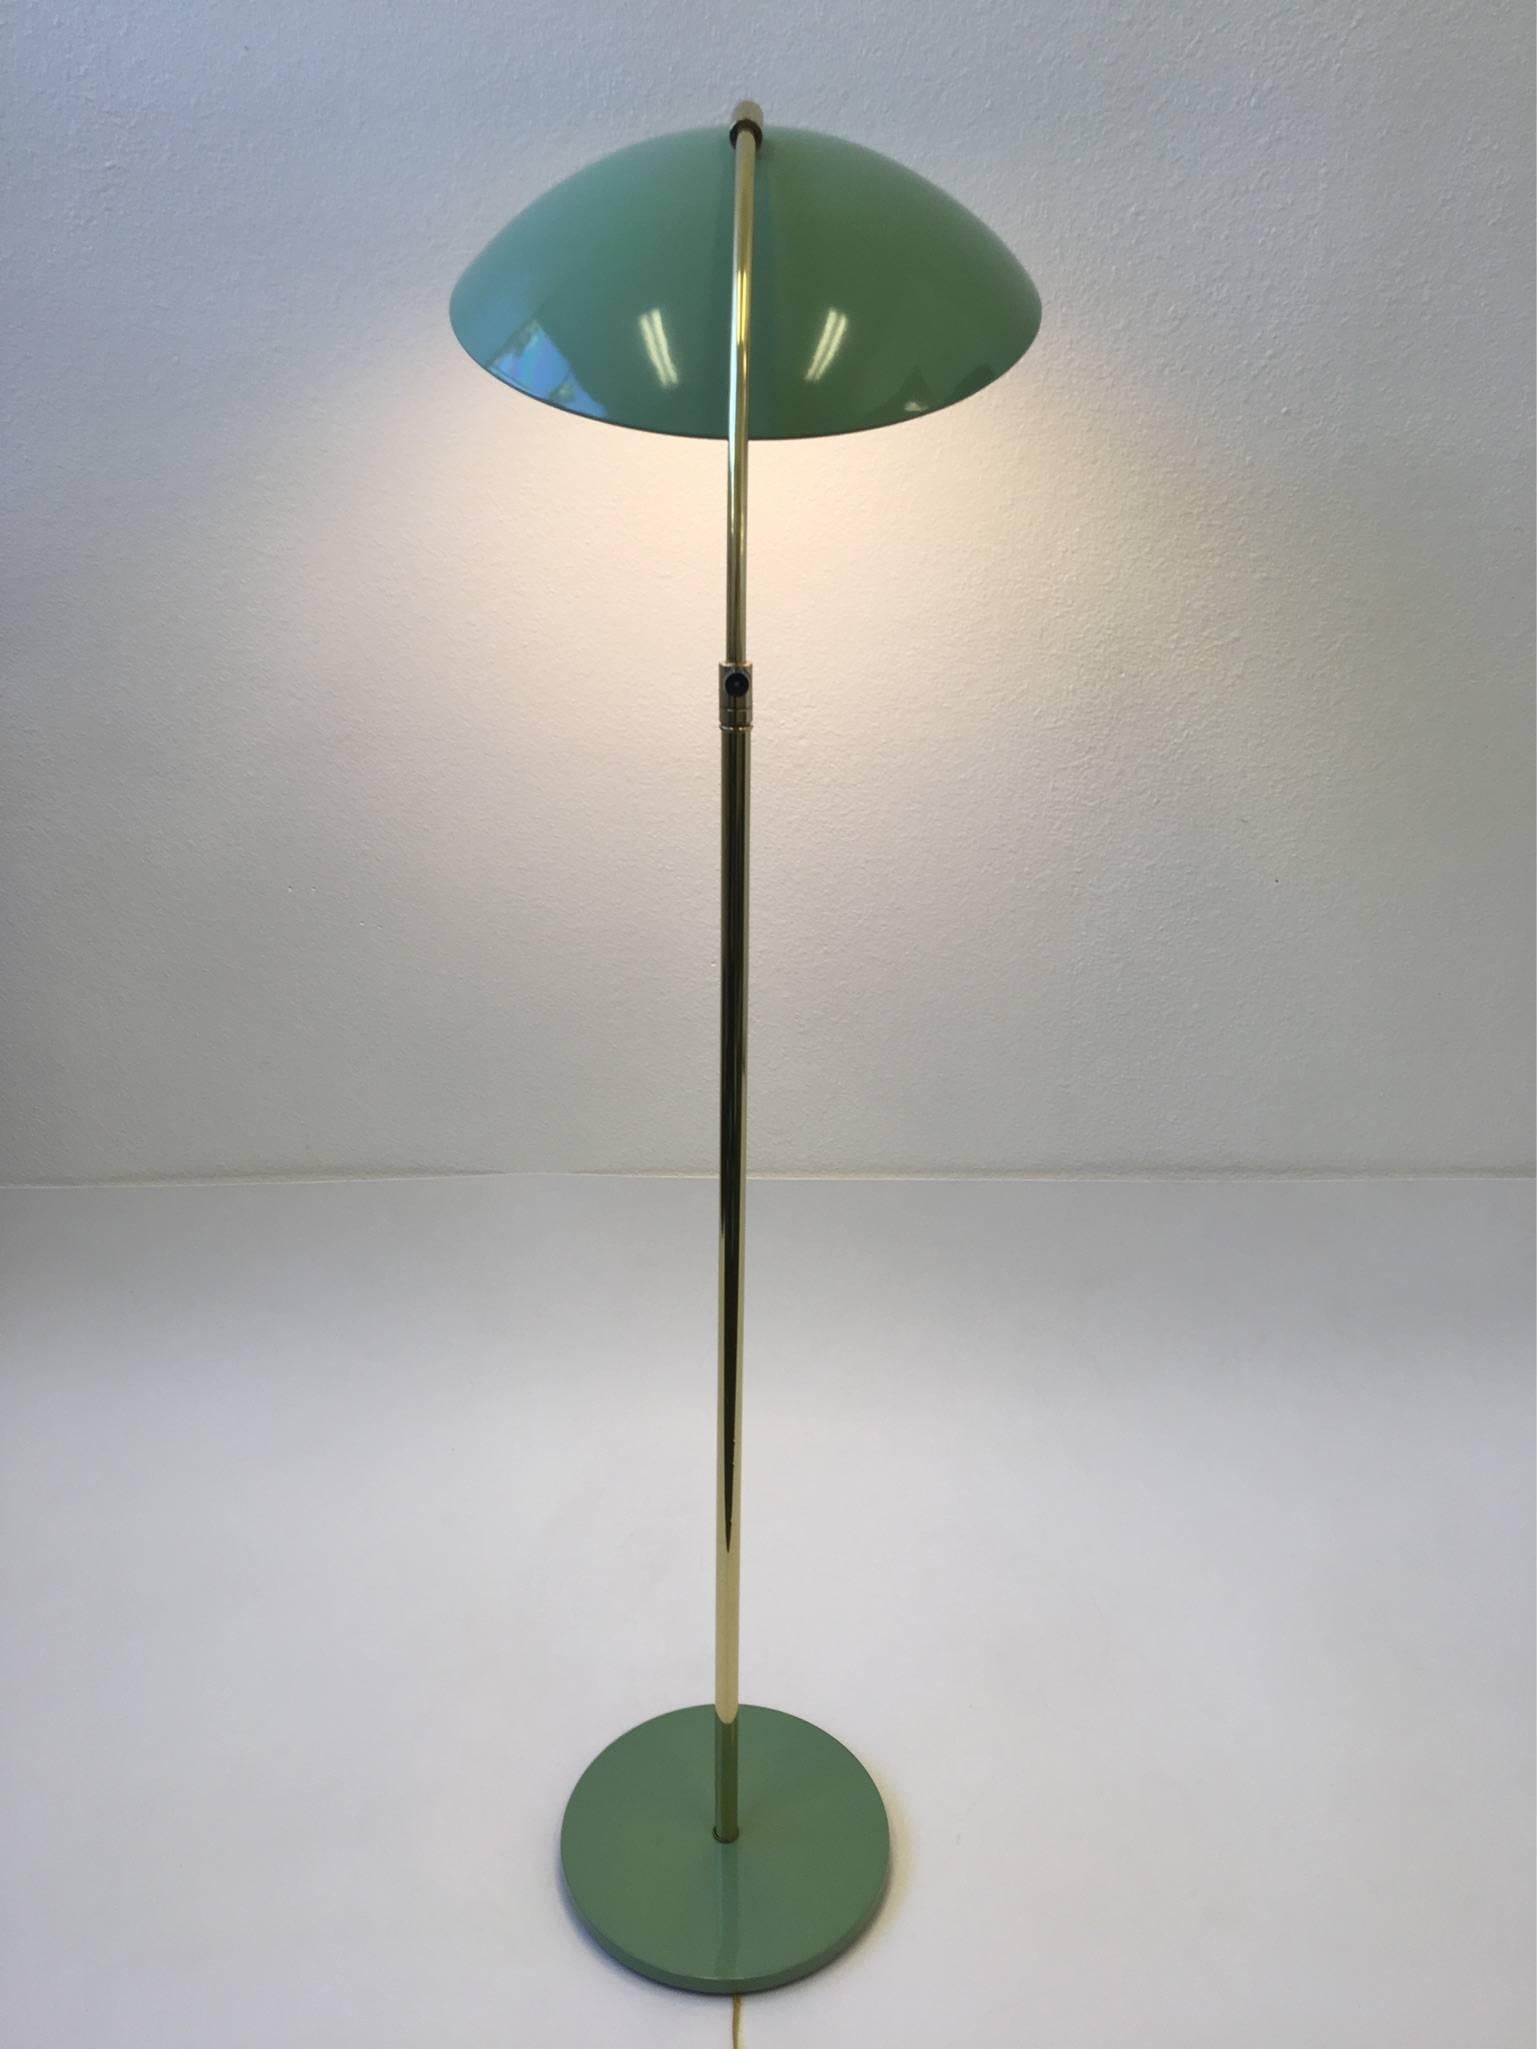 A beautiful adjustable floor lamp designed by Kurt Versen in the 1940s. Newly restored in a fern green lacquer and polished brass. It retains the reflector which most lamps miss. The lamp takes two regular Edison bulbs. The lamp can be rotated. The